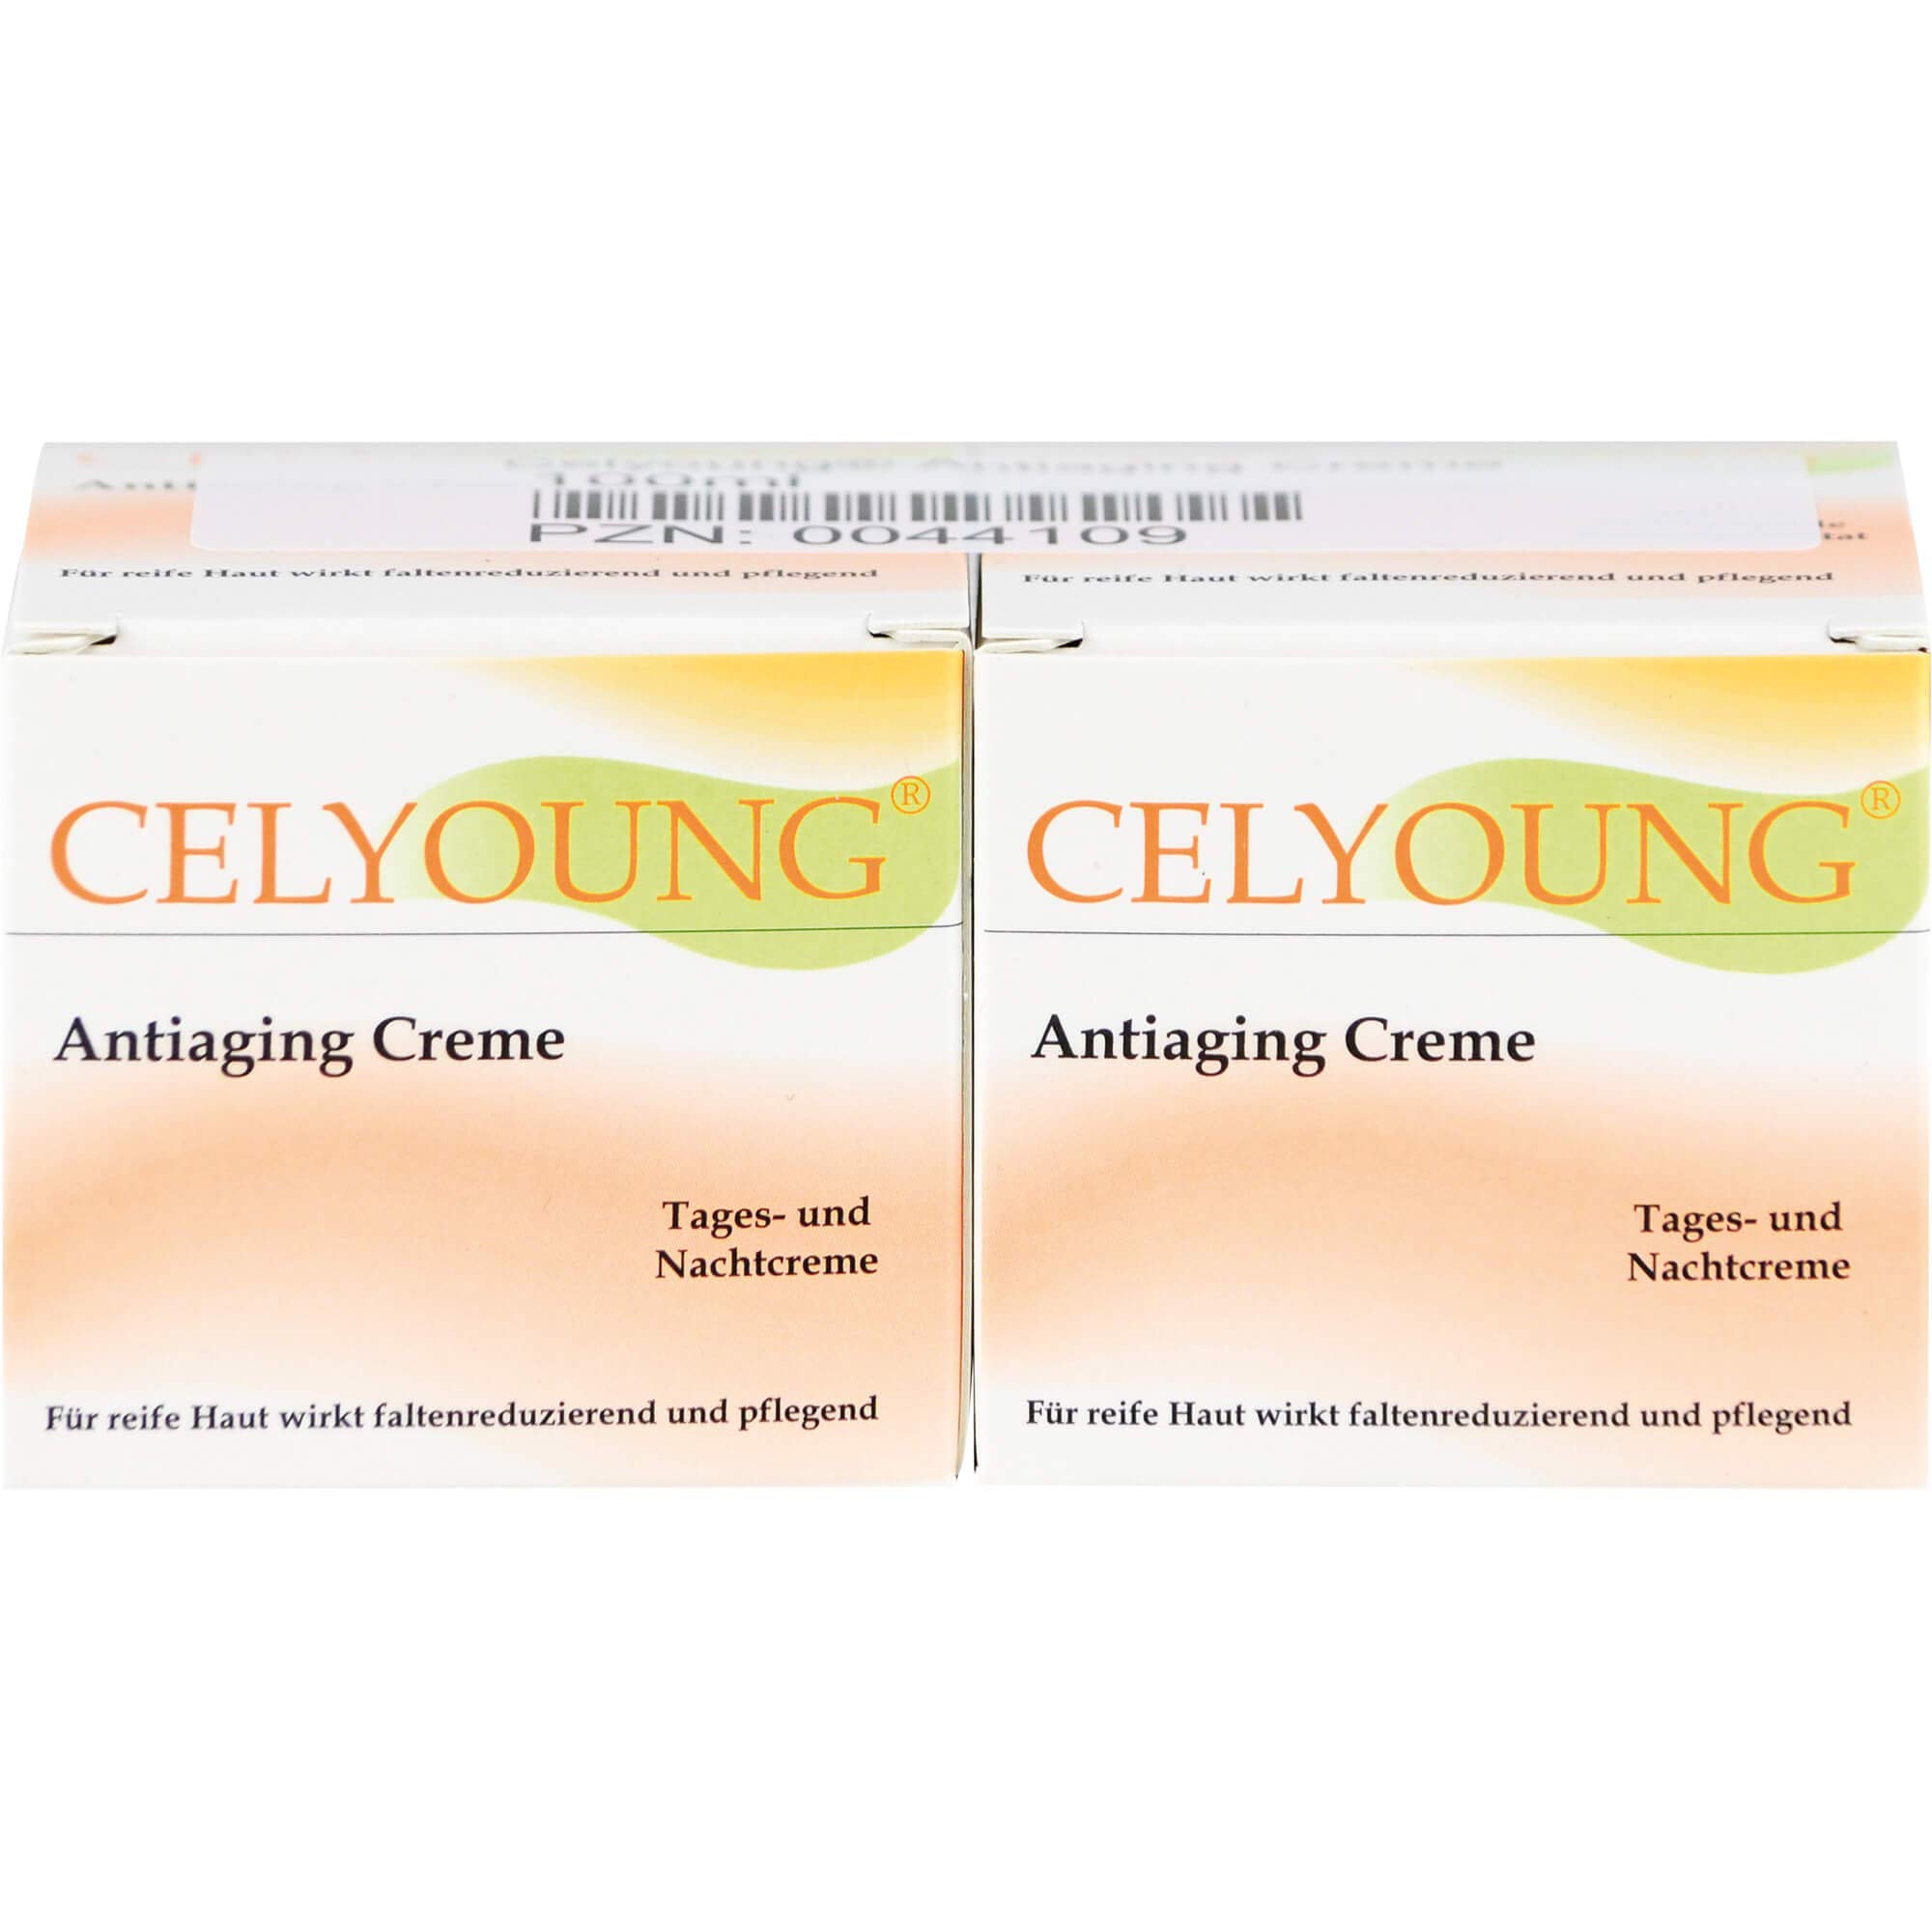 CELYOUNG Antiaging Creme Doppelpack, 2x50 ml